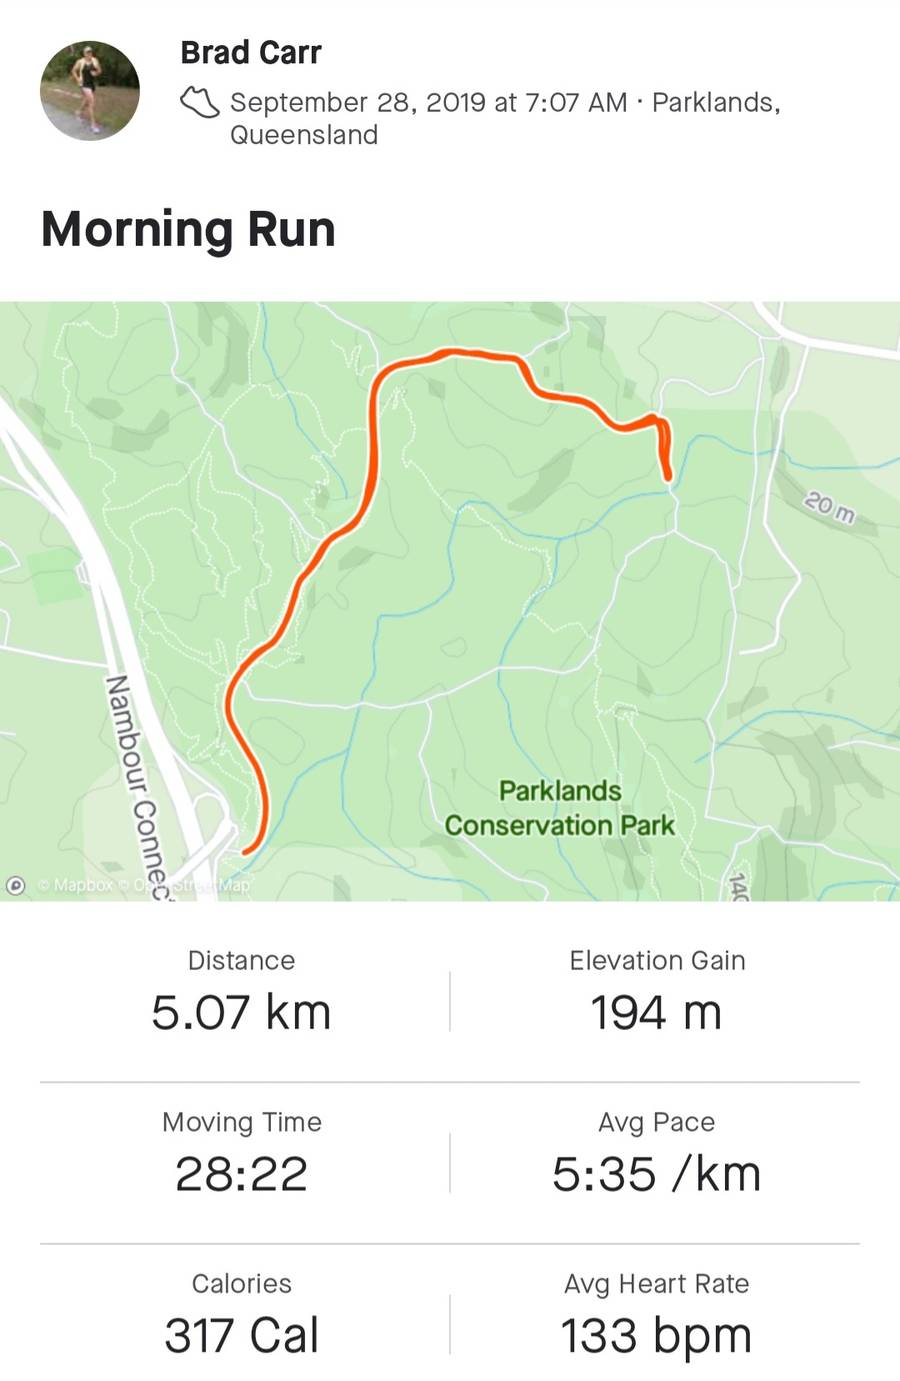 So, is it the hardest parkrun I have ever done? (Photo: Strava screenshot)